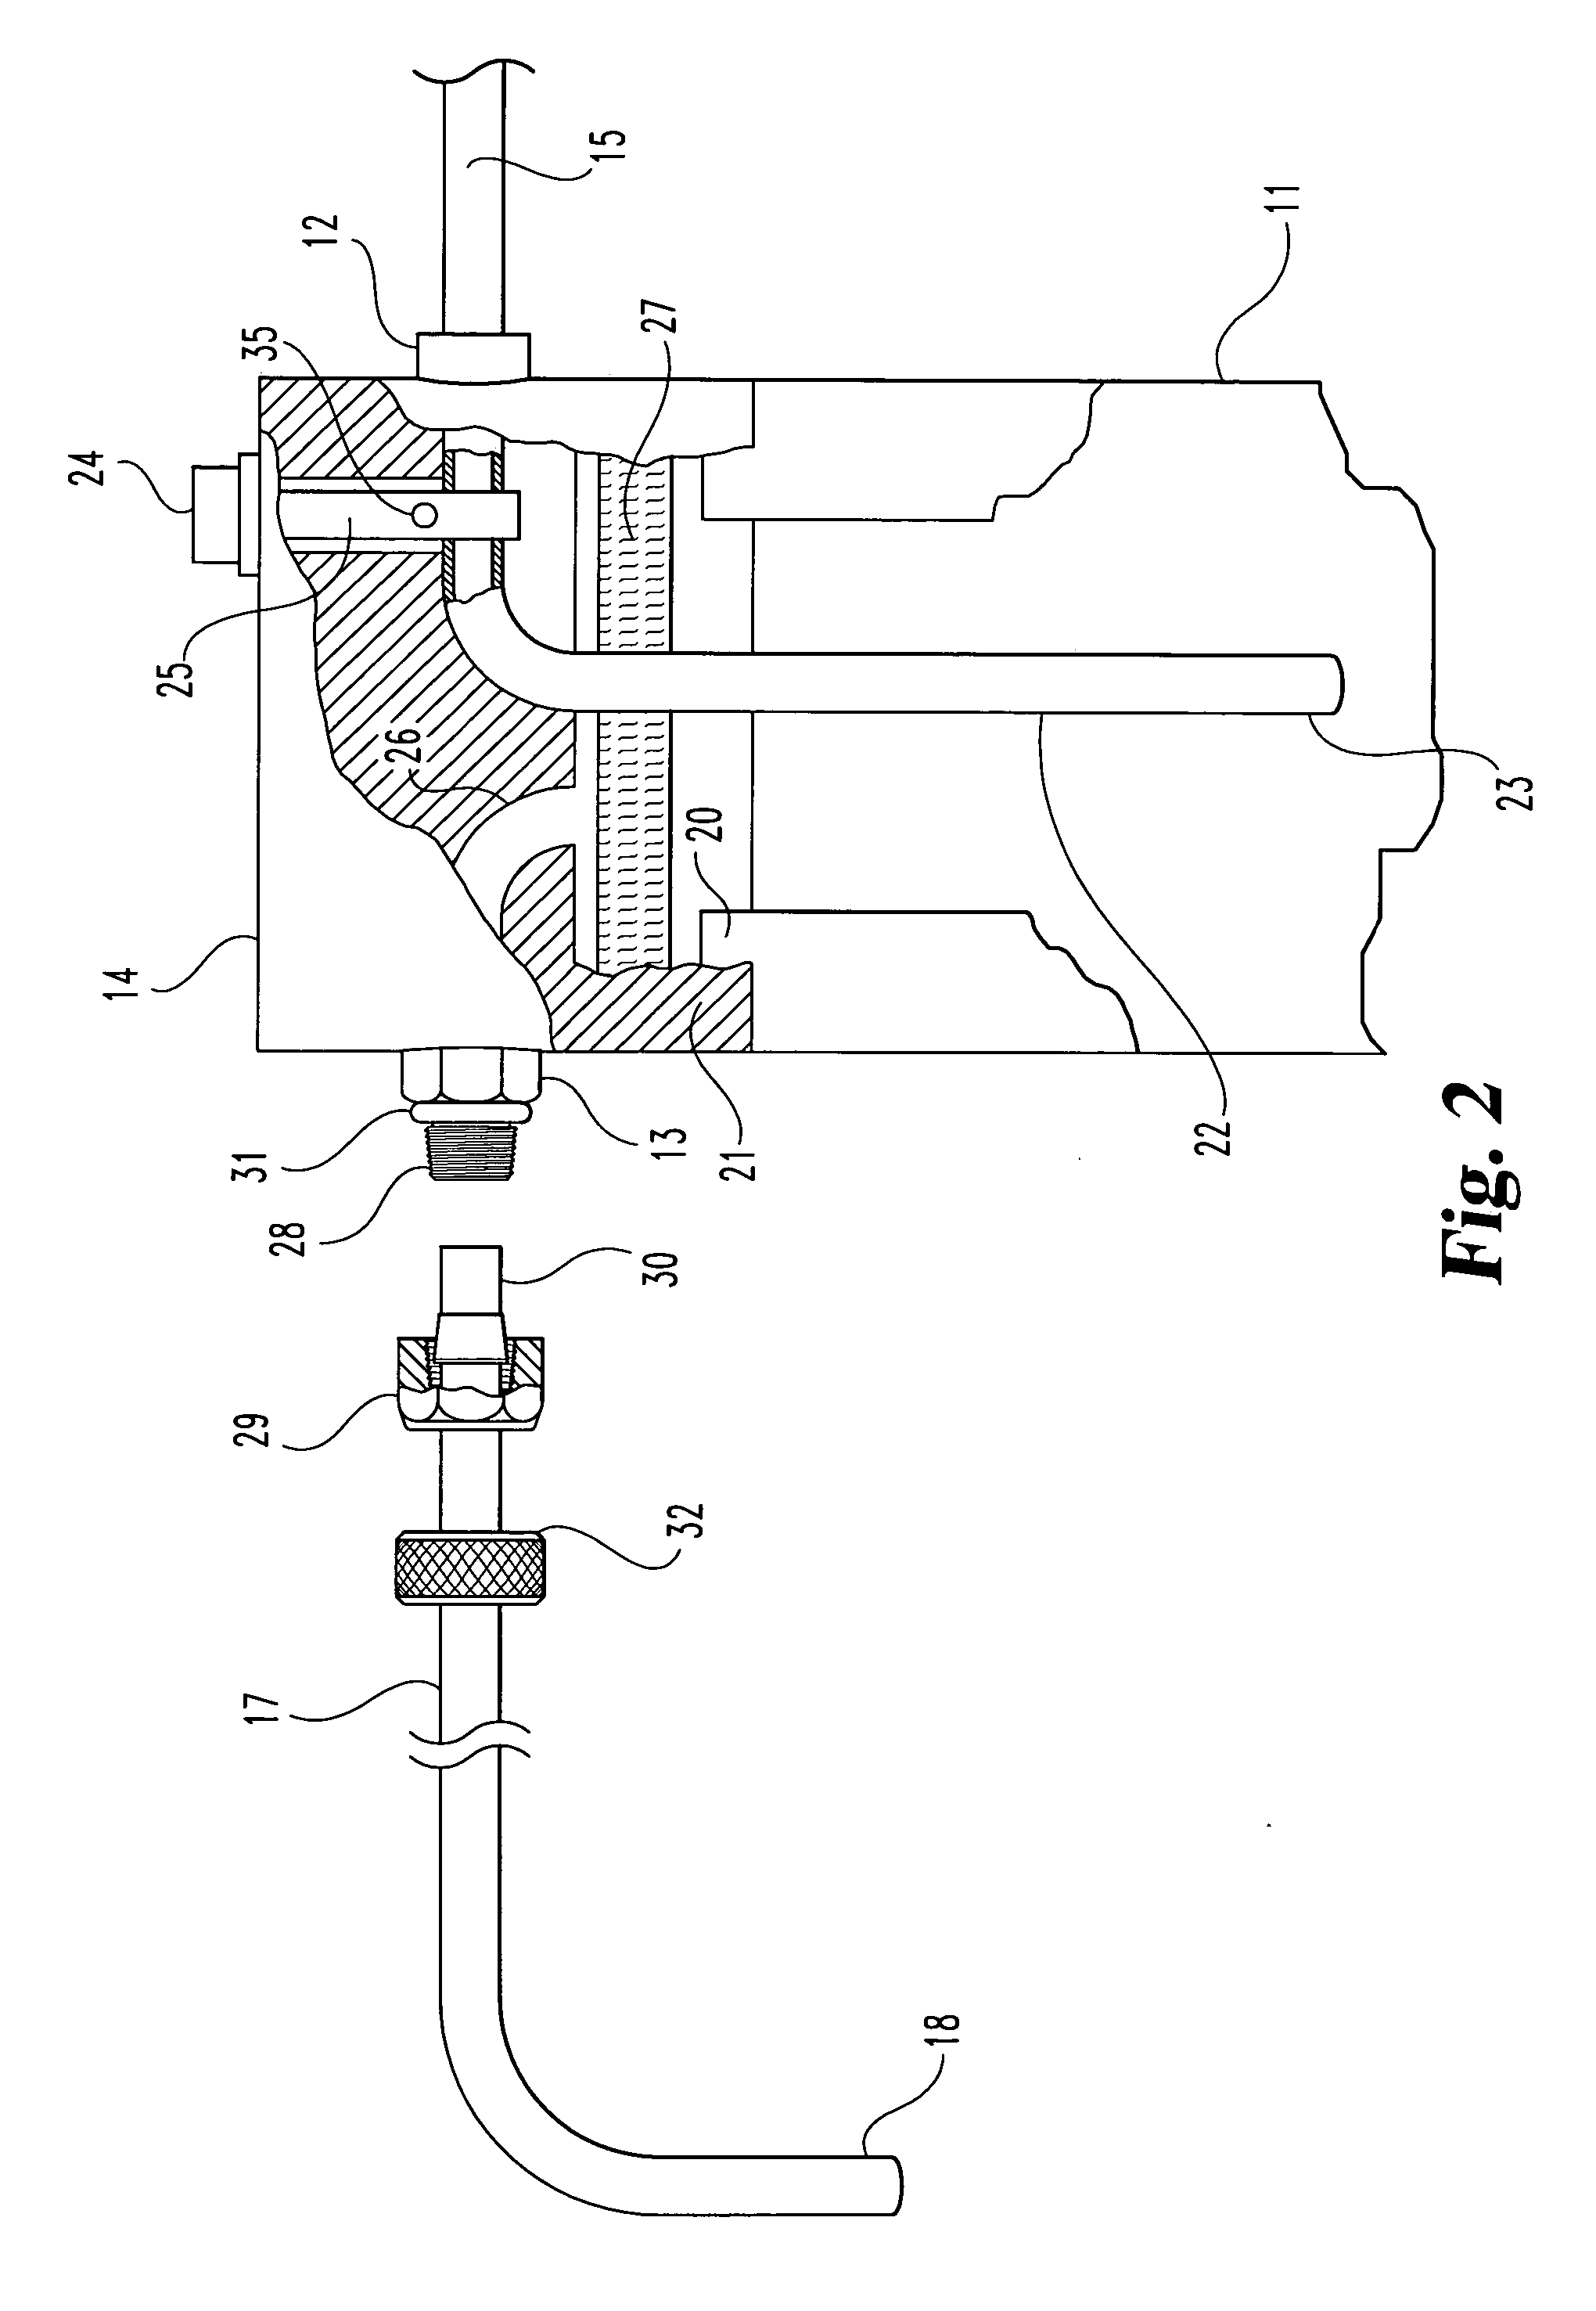 Tooth powdering applicator with nozzle spray control